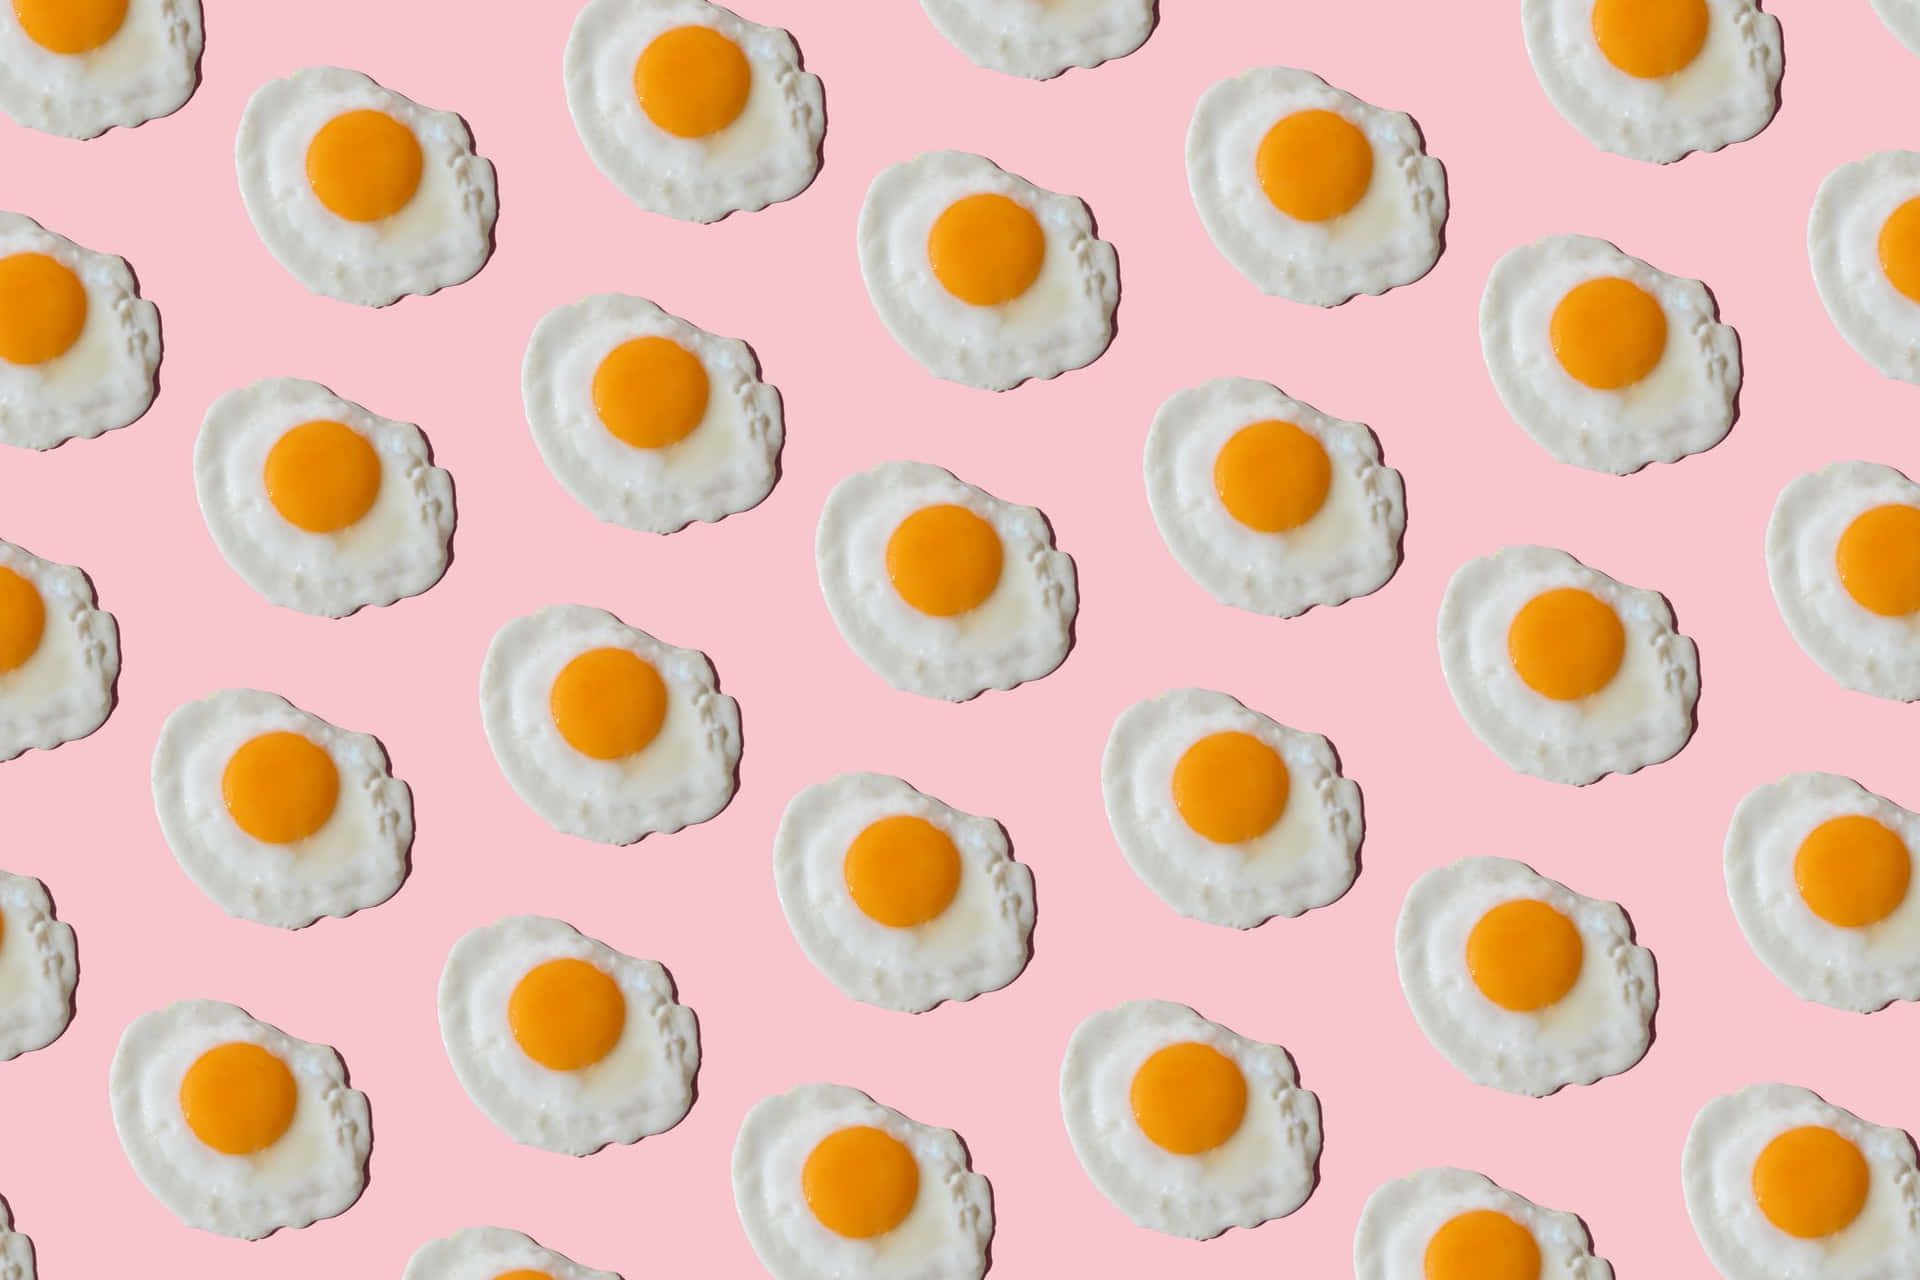 A pattern of fried eggs on a pink background - Egg